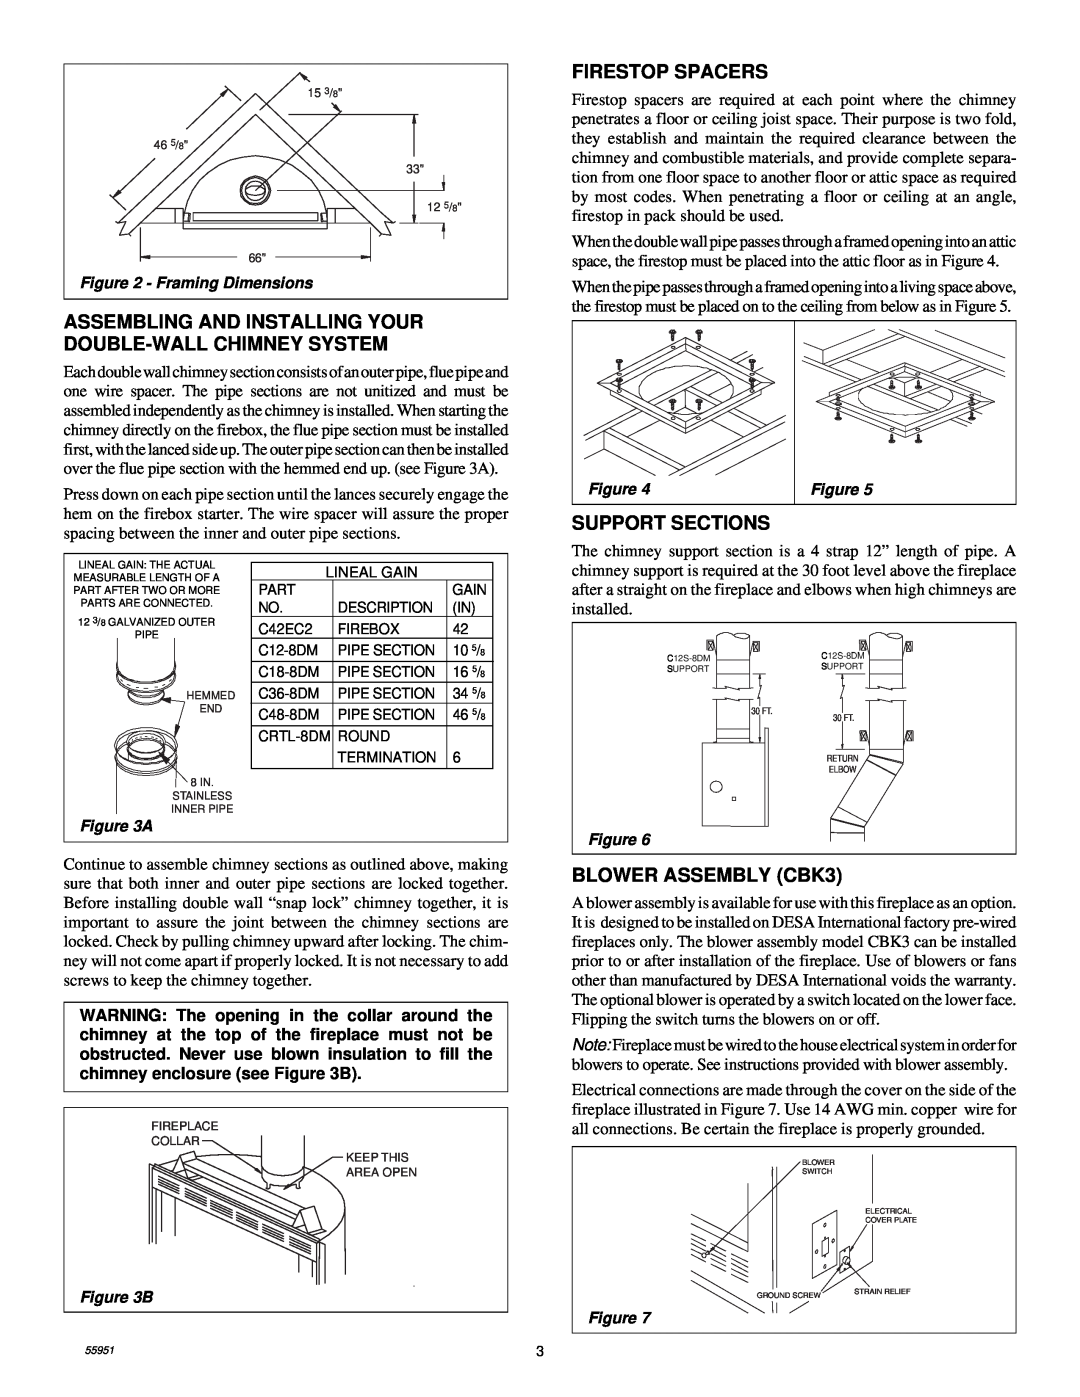 Desa C42EC2 installation instructions Firestop Spacers, Support Sections, BLOWER ASSEMBLY CBK3, Framing Dimensions 